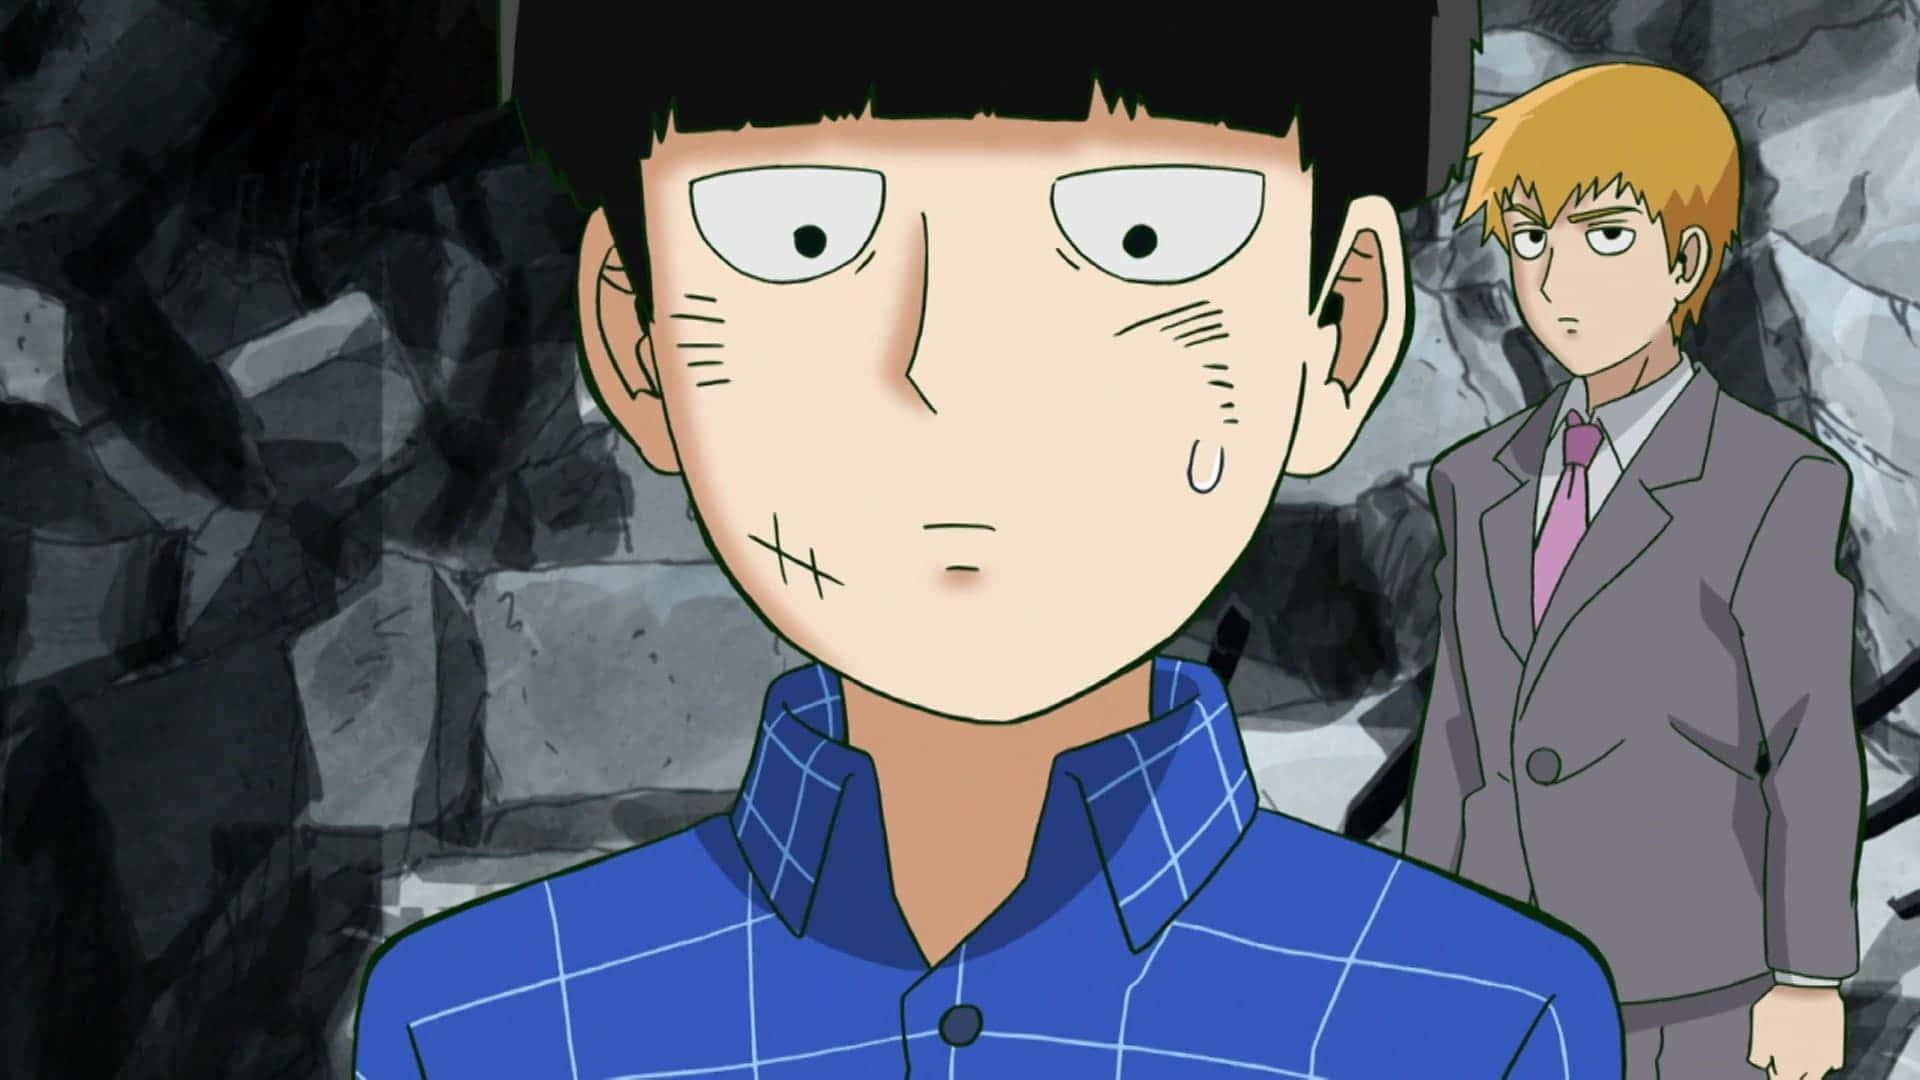 Join Mob on the episode of Mob Psycho 100